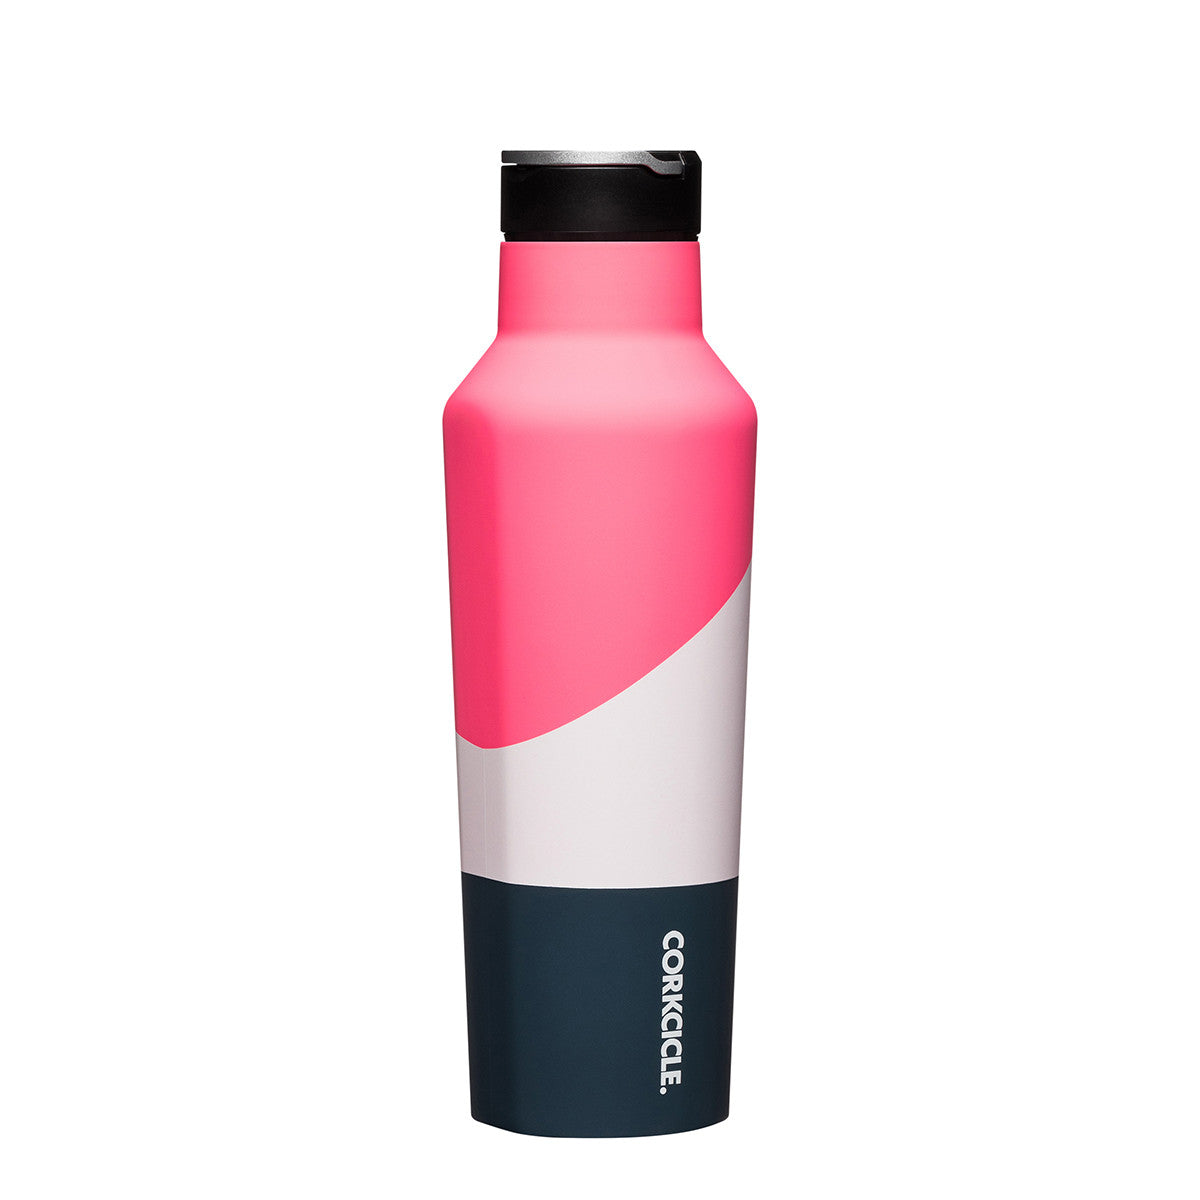 CORKCICLE Insulated Sports Canteen Bottle 20oz (600ml) - Colour Block Electric Pink